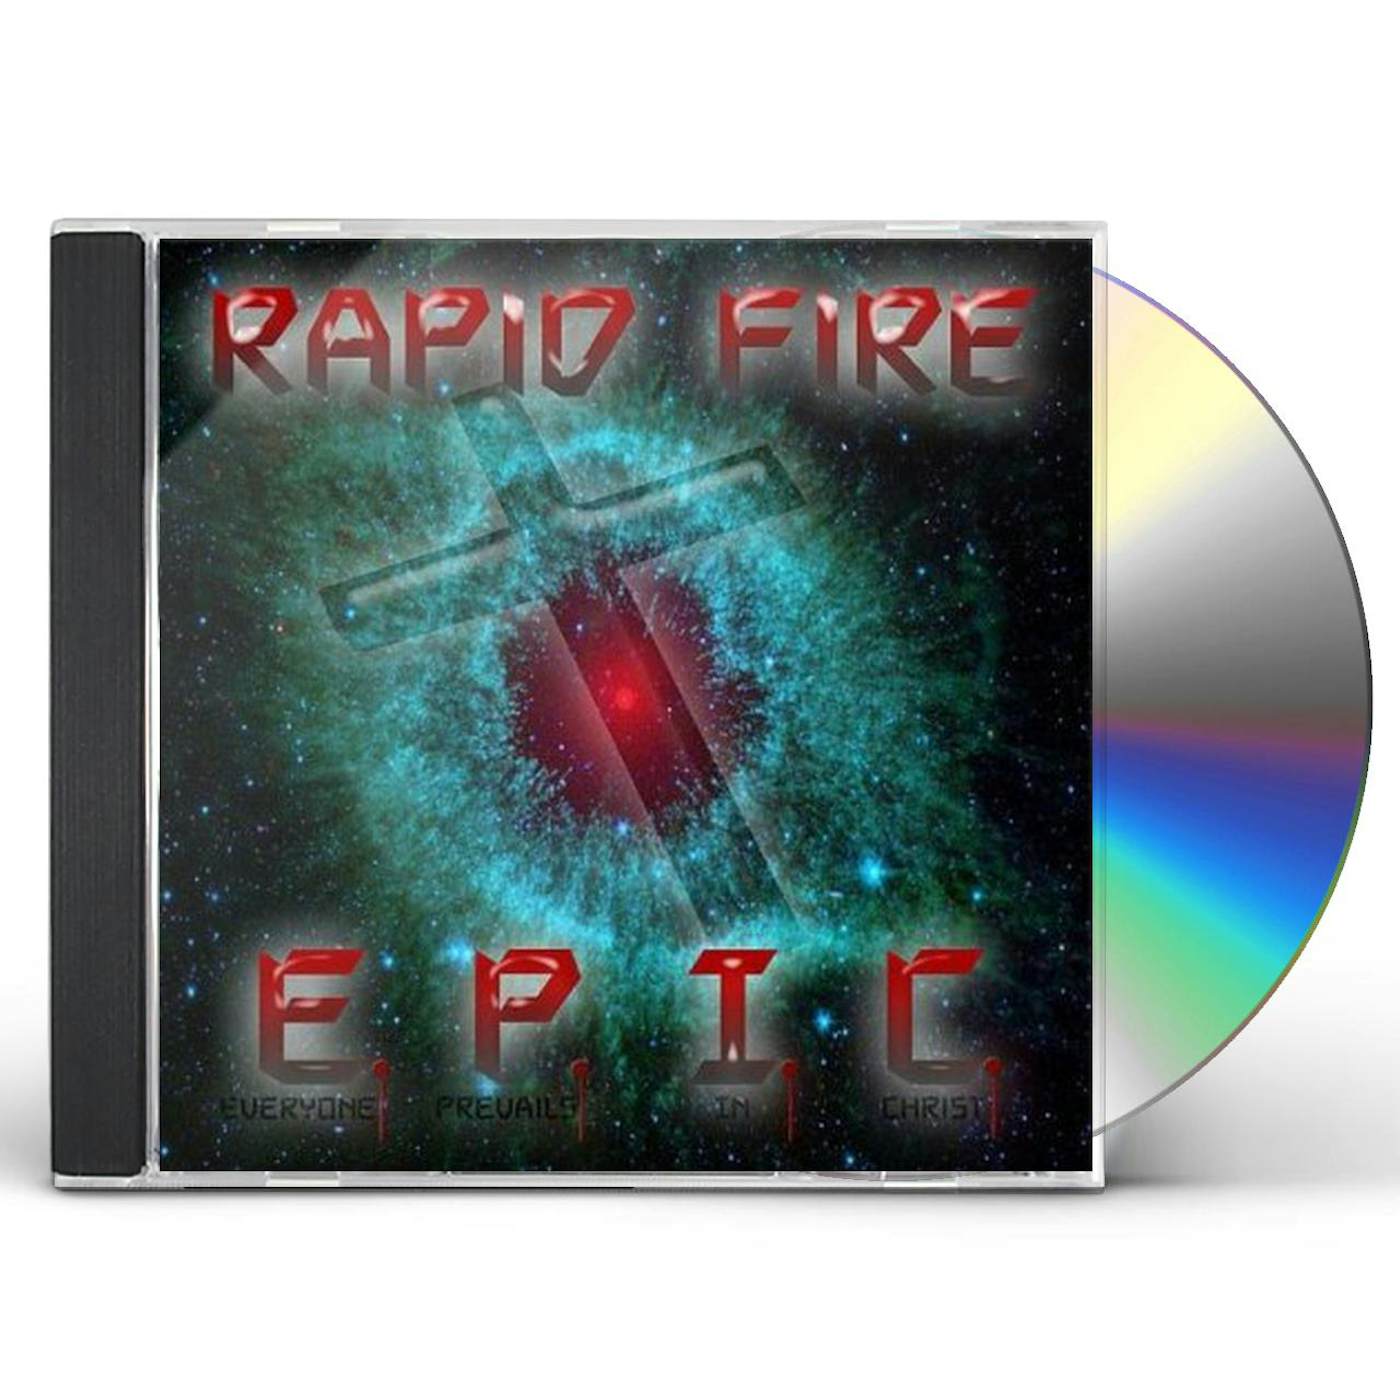 Rapid Fire E.P.I.C. (EVERYONE PREVAILS IN CHRIST) CD